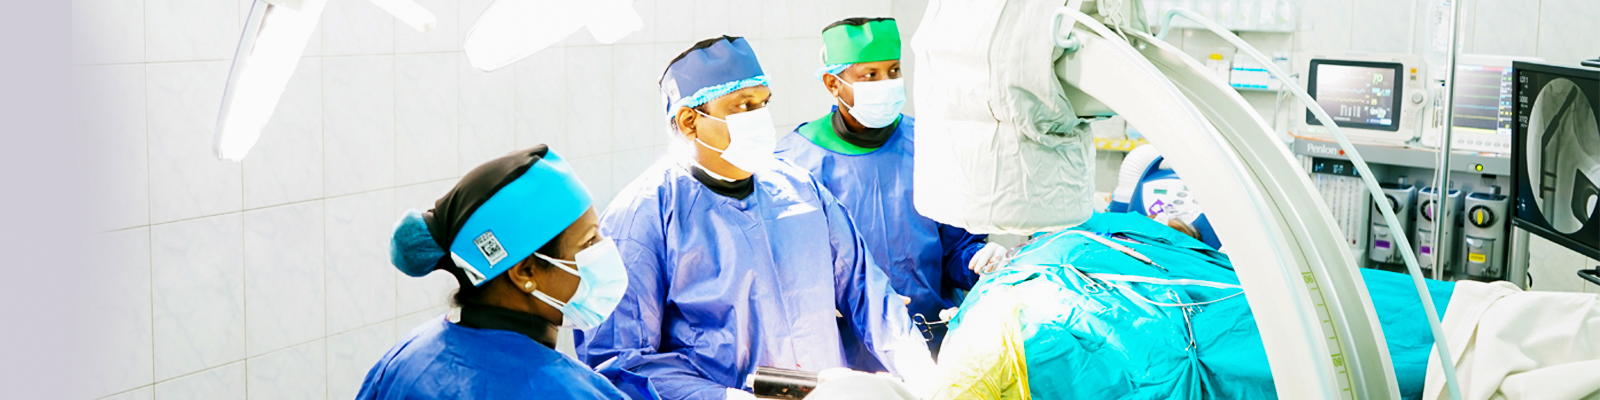 Surgical Operations